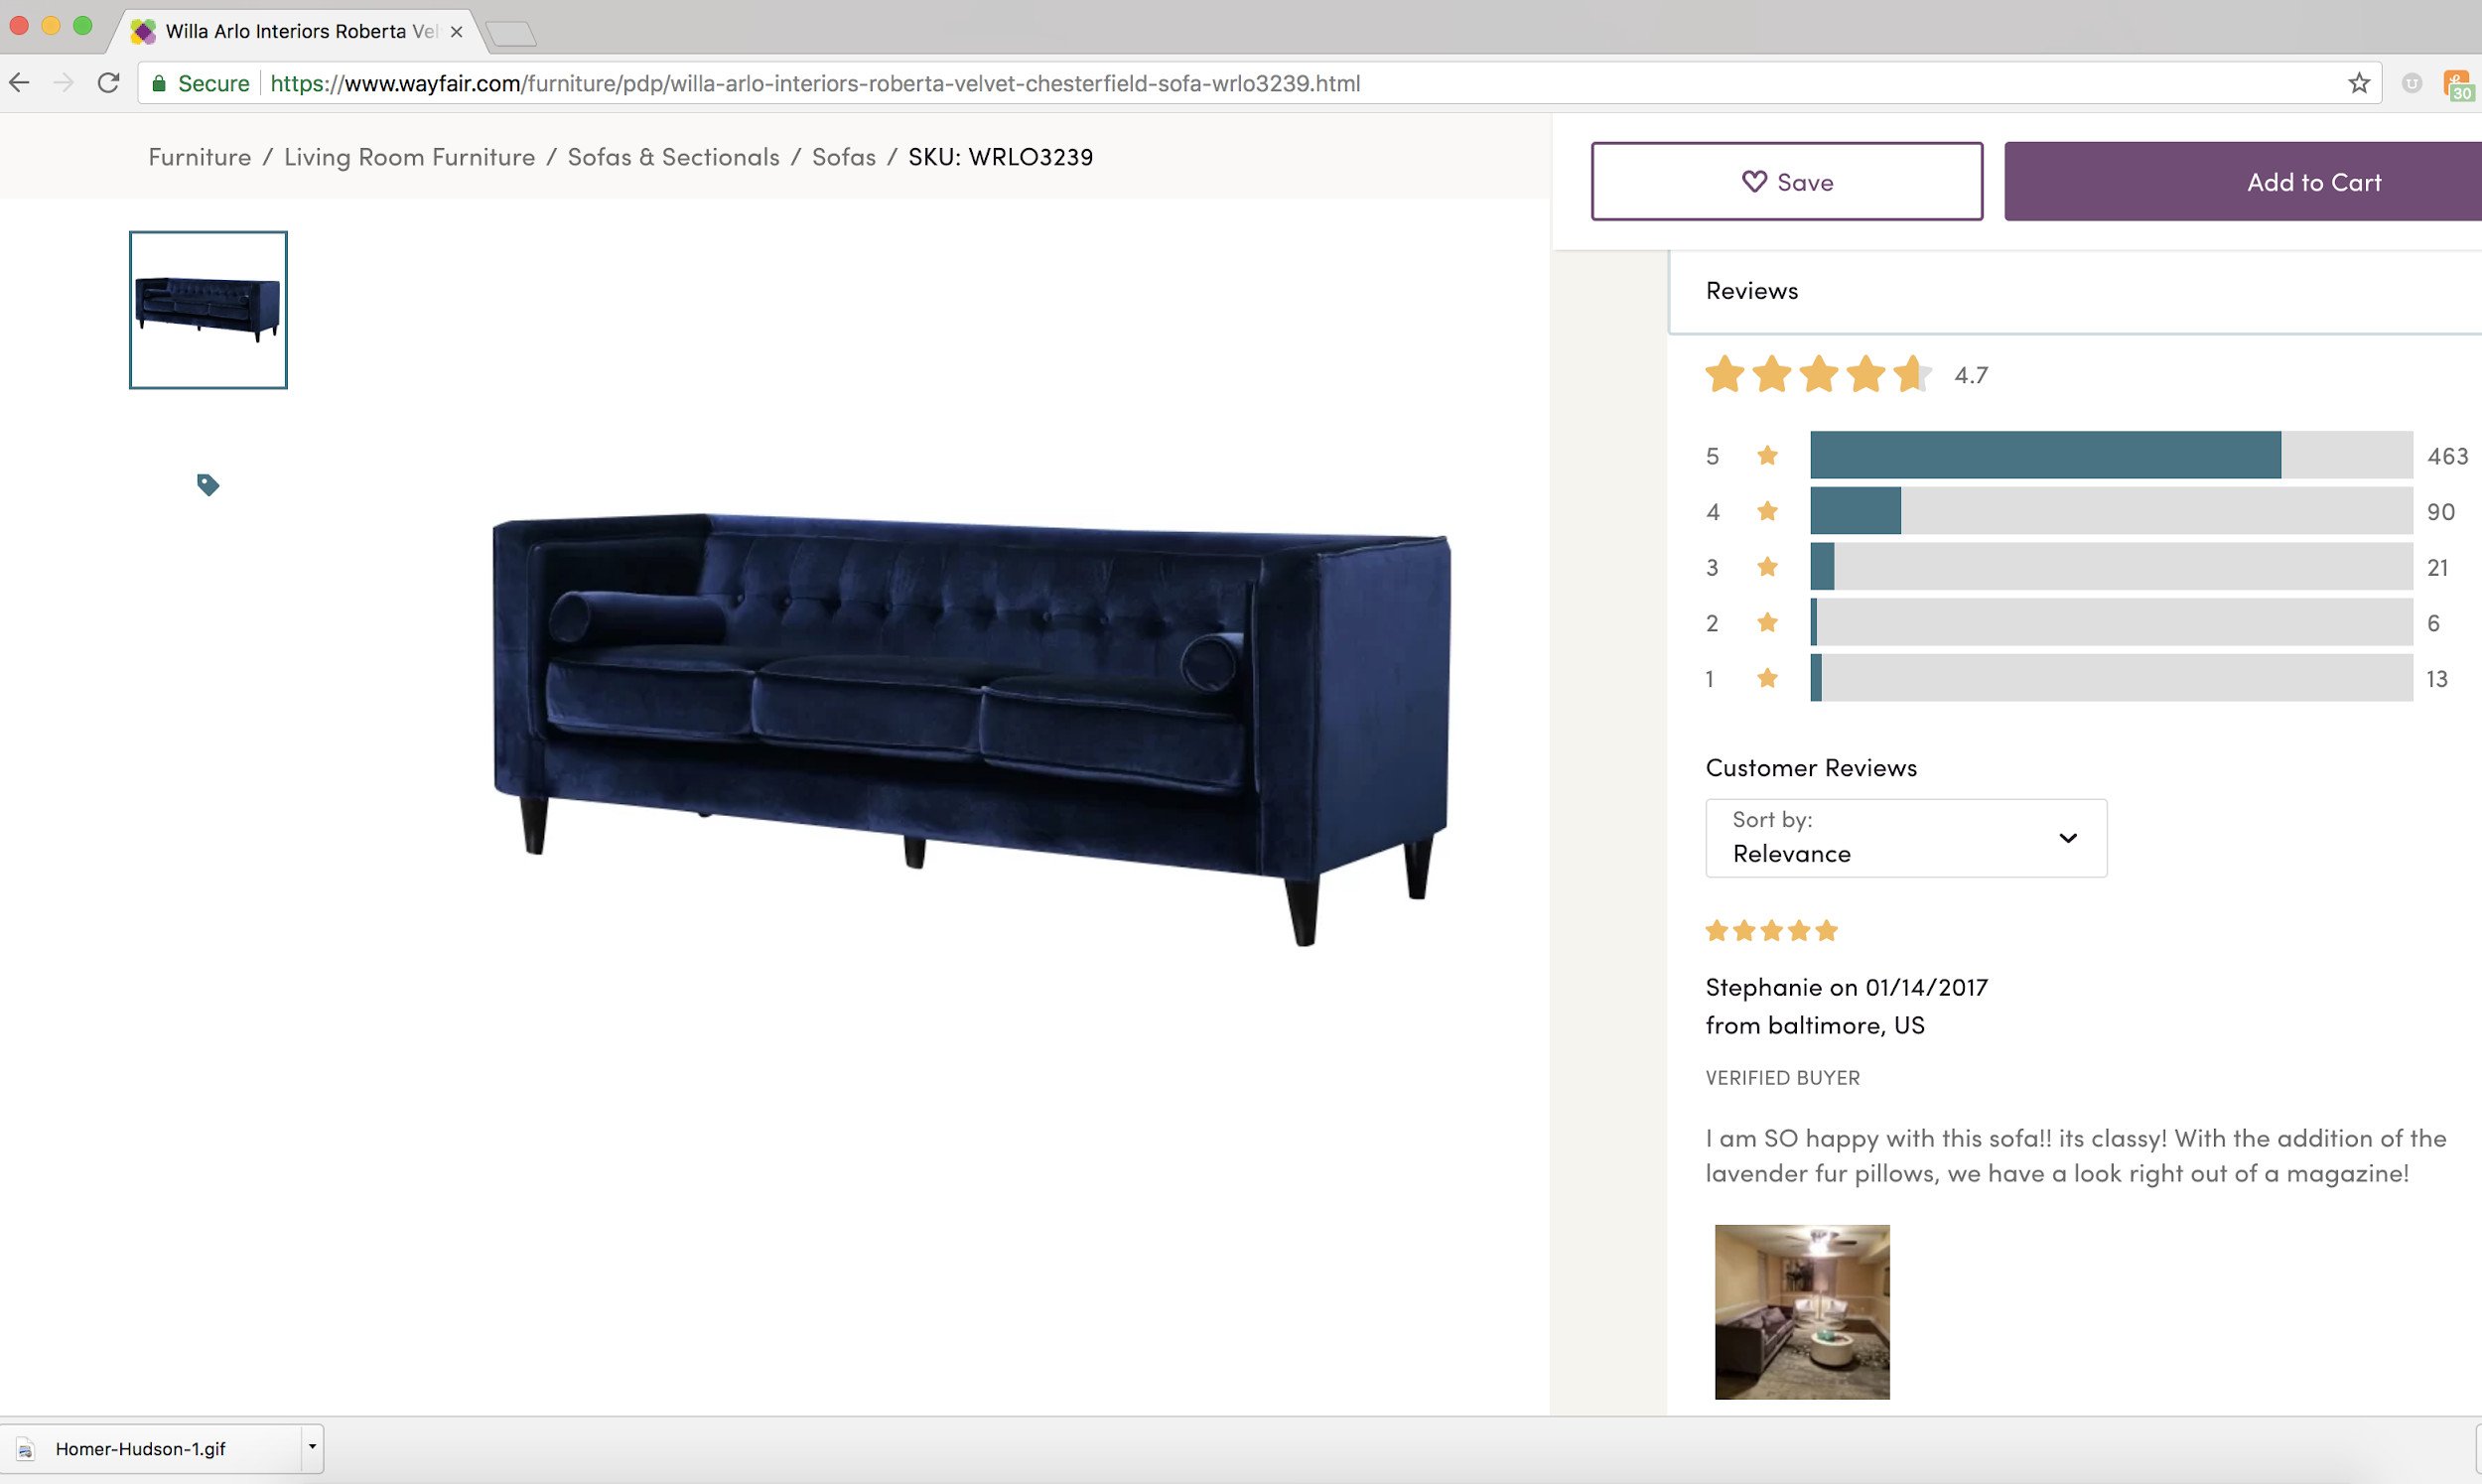 couch product rating online